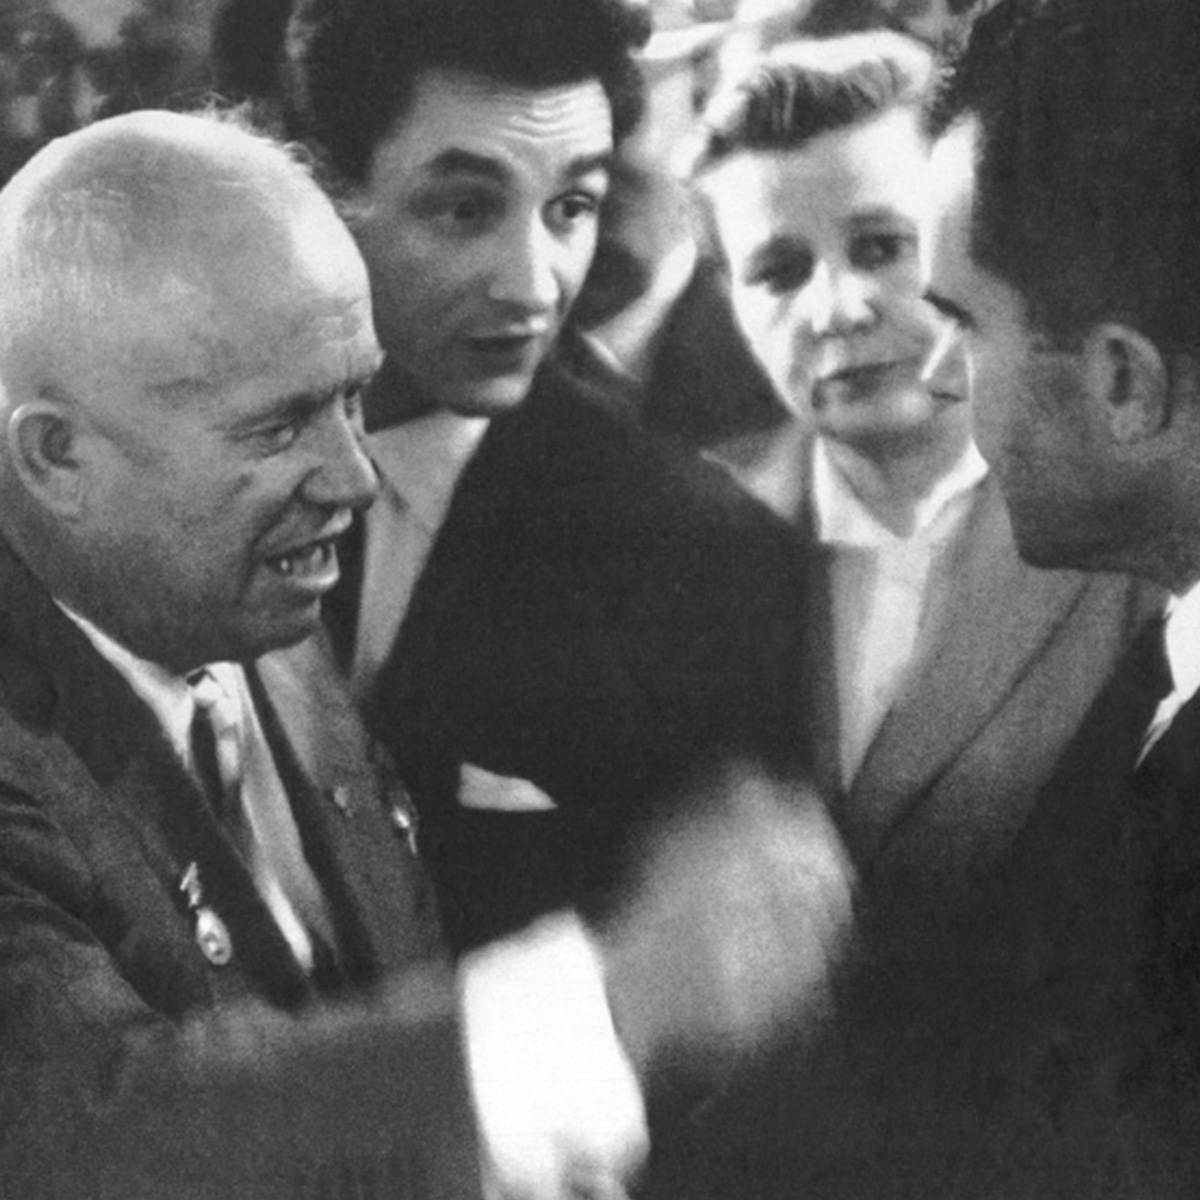 A photograph of Khrushchev and Nixon at the Kitchen Debate.